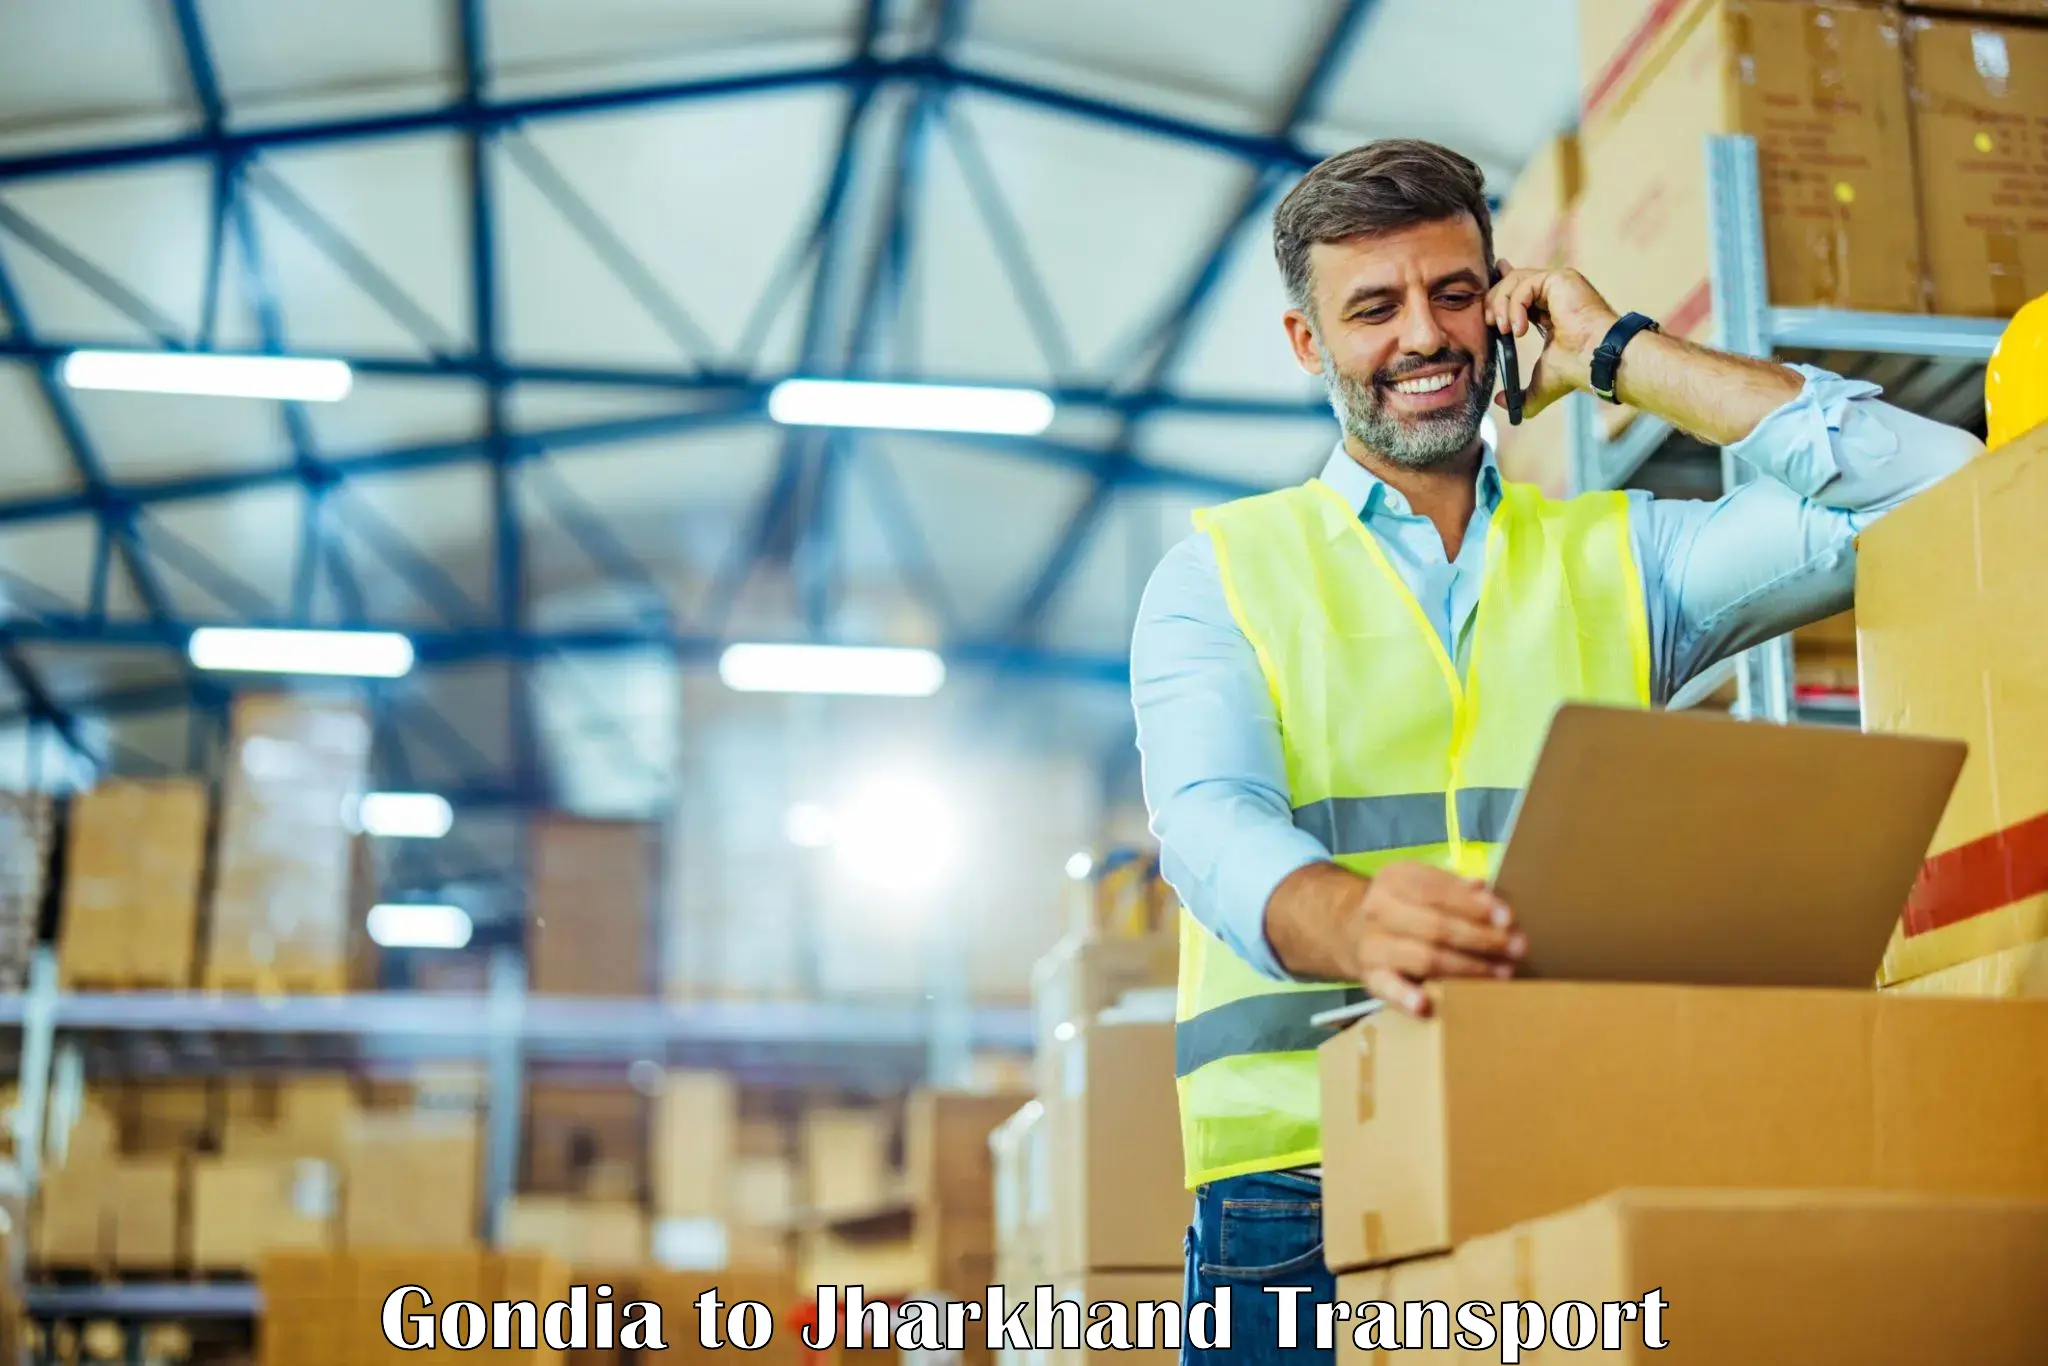 Nationwide transport services Gondia to IIT Dhanbad